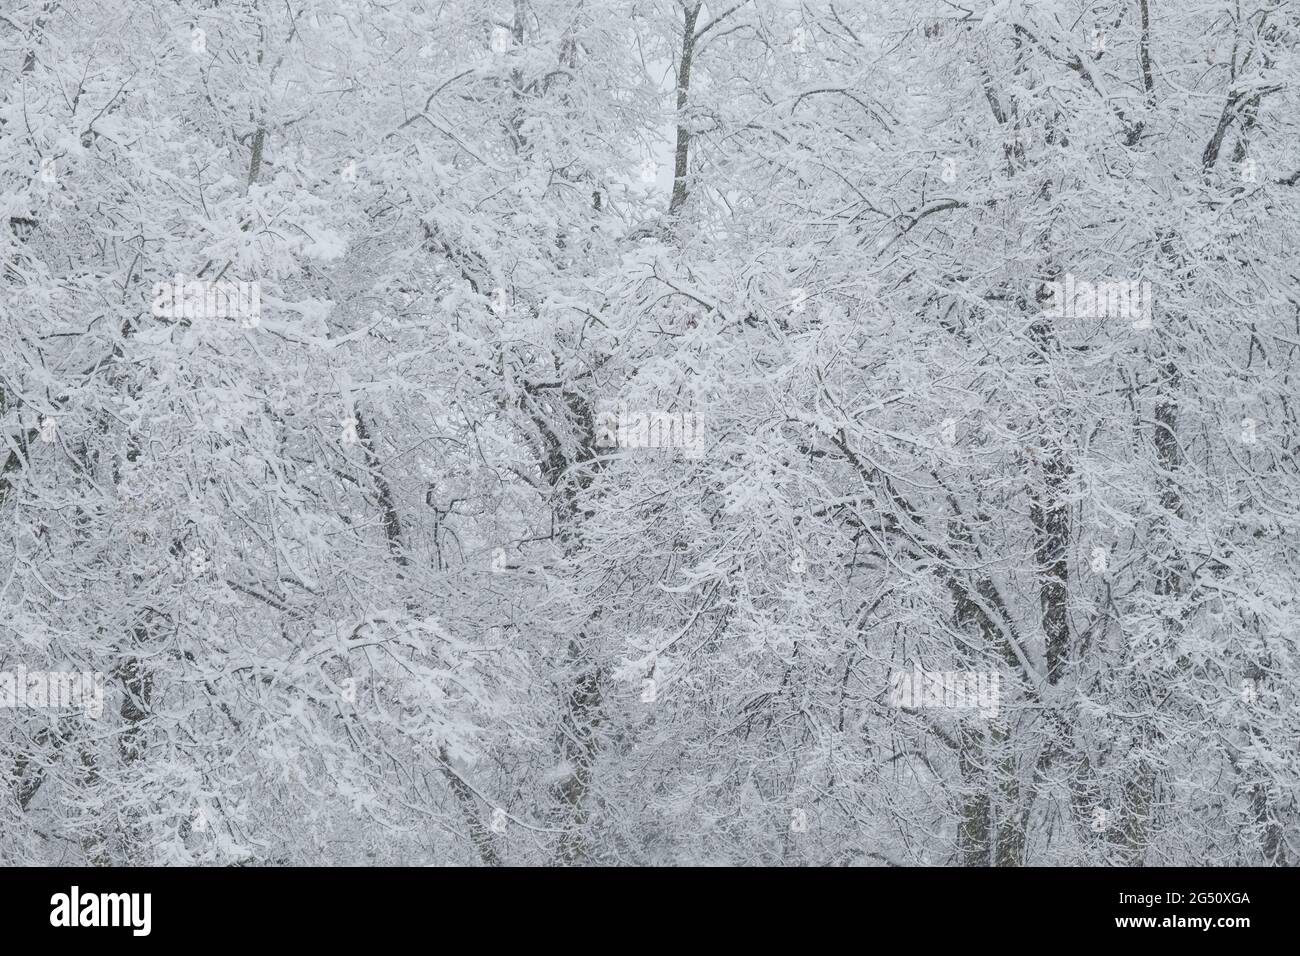 Trees covered with a large layer of snow. Snow-covered branches, snowfall. Winter landscape. Stock Photo